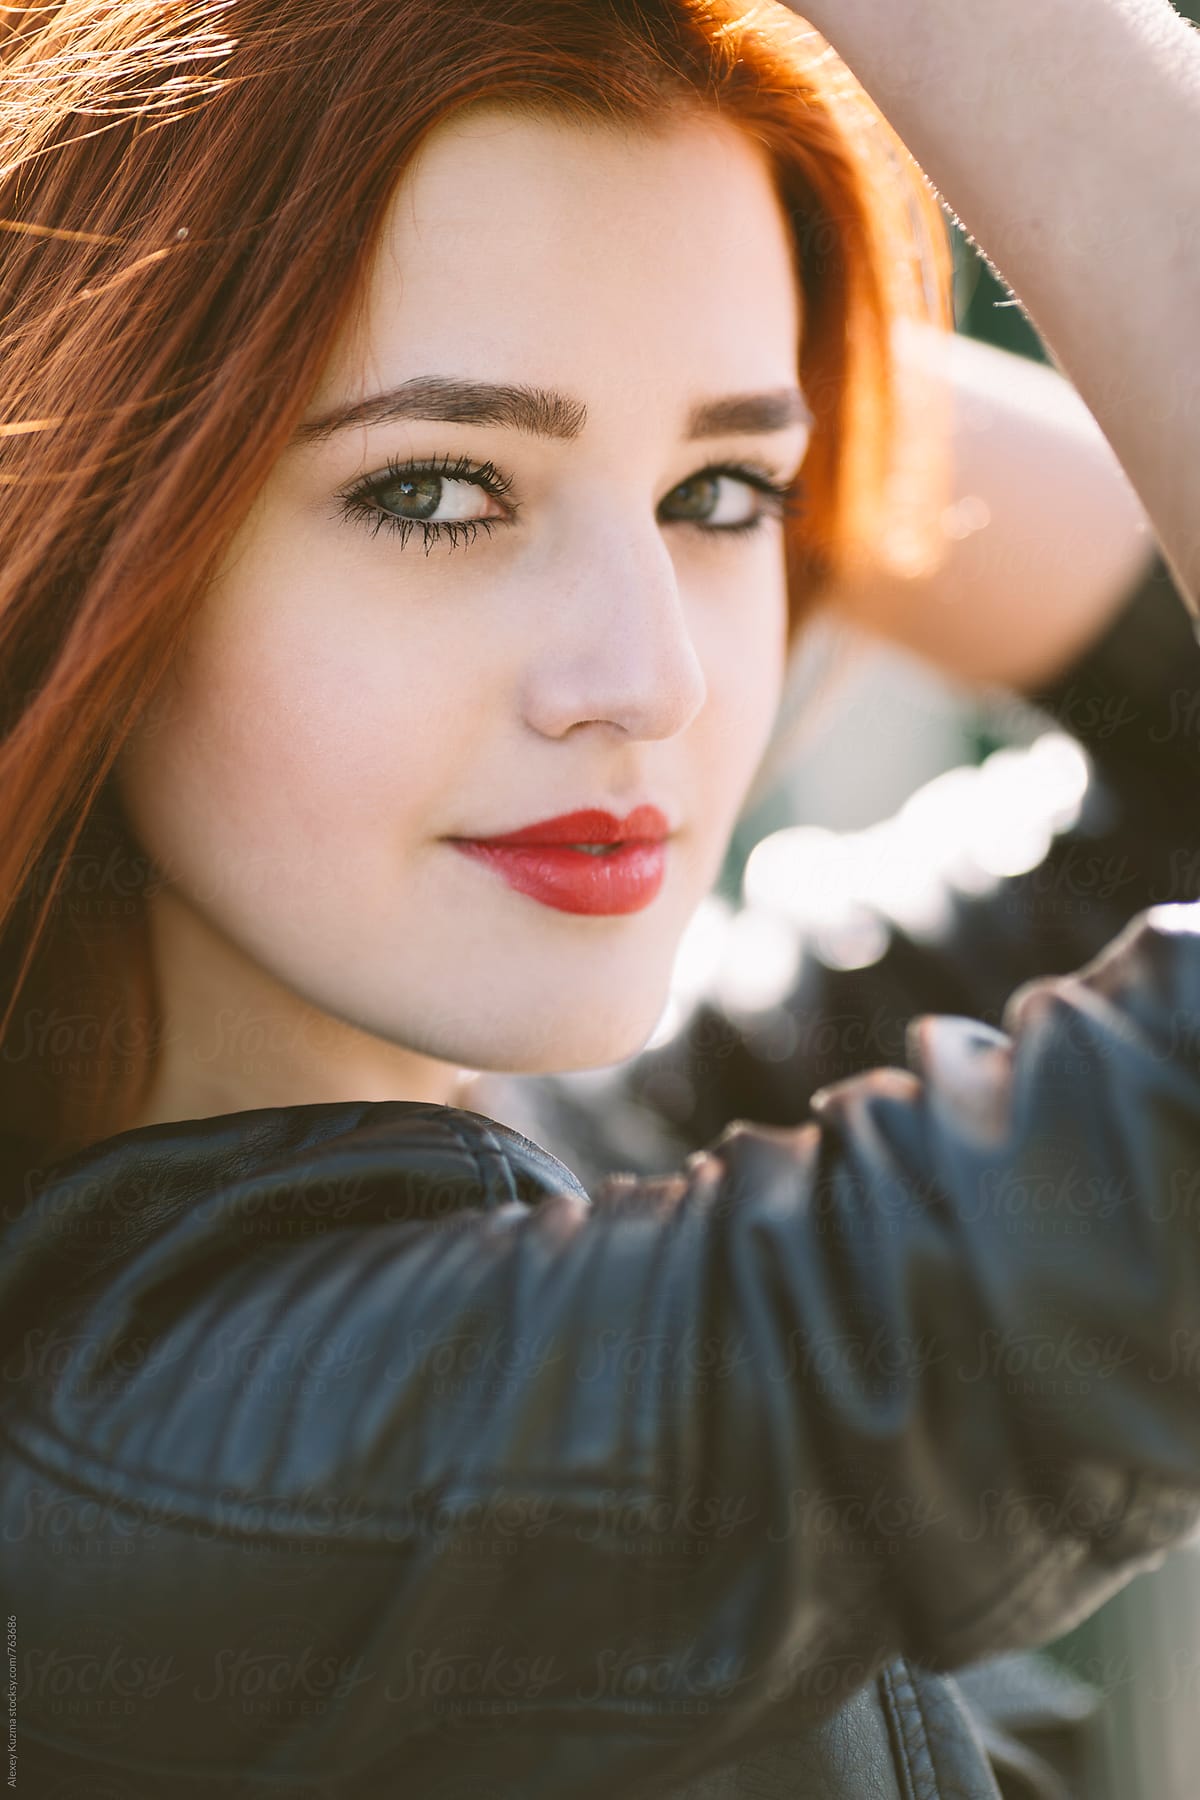 Young Woman With Red Hair By Stocksy Contributor Alexey Kuzma Stocksy